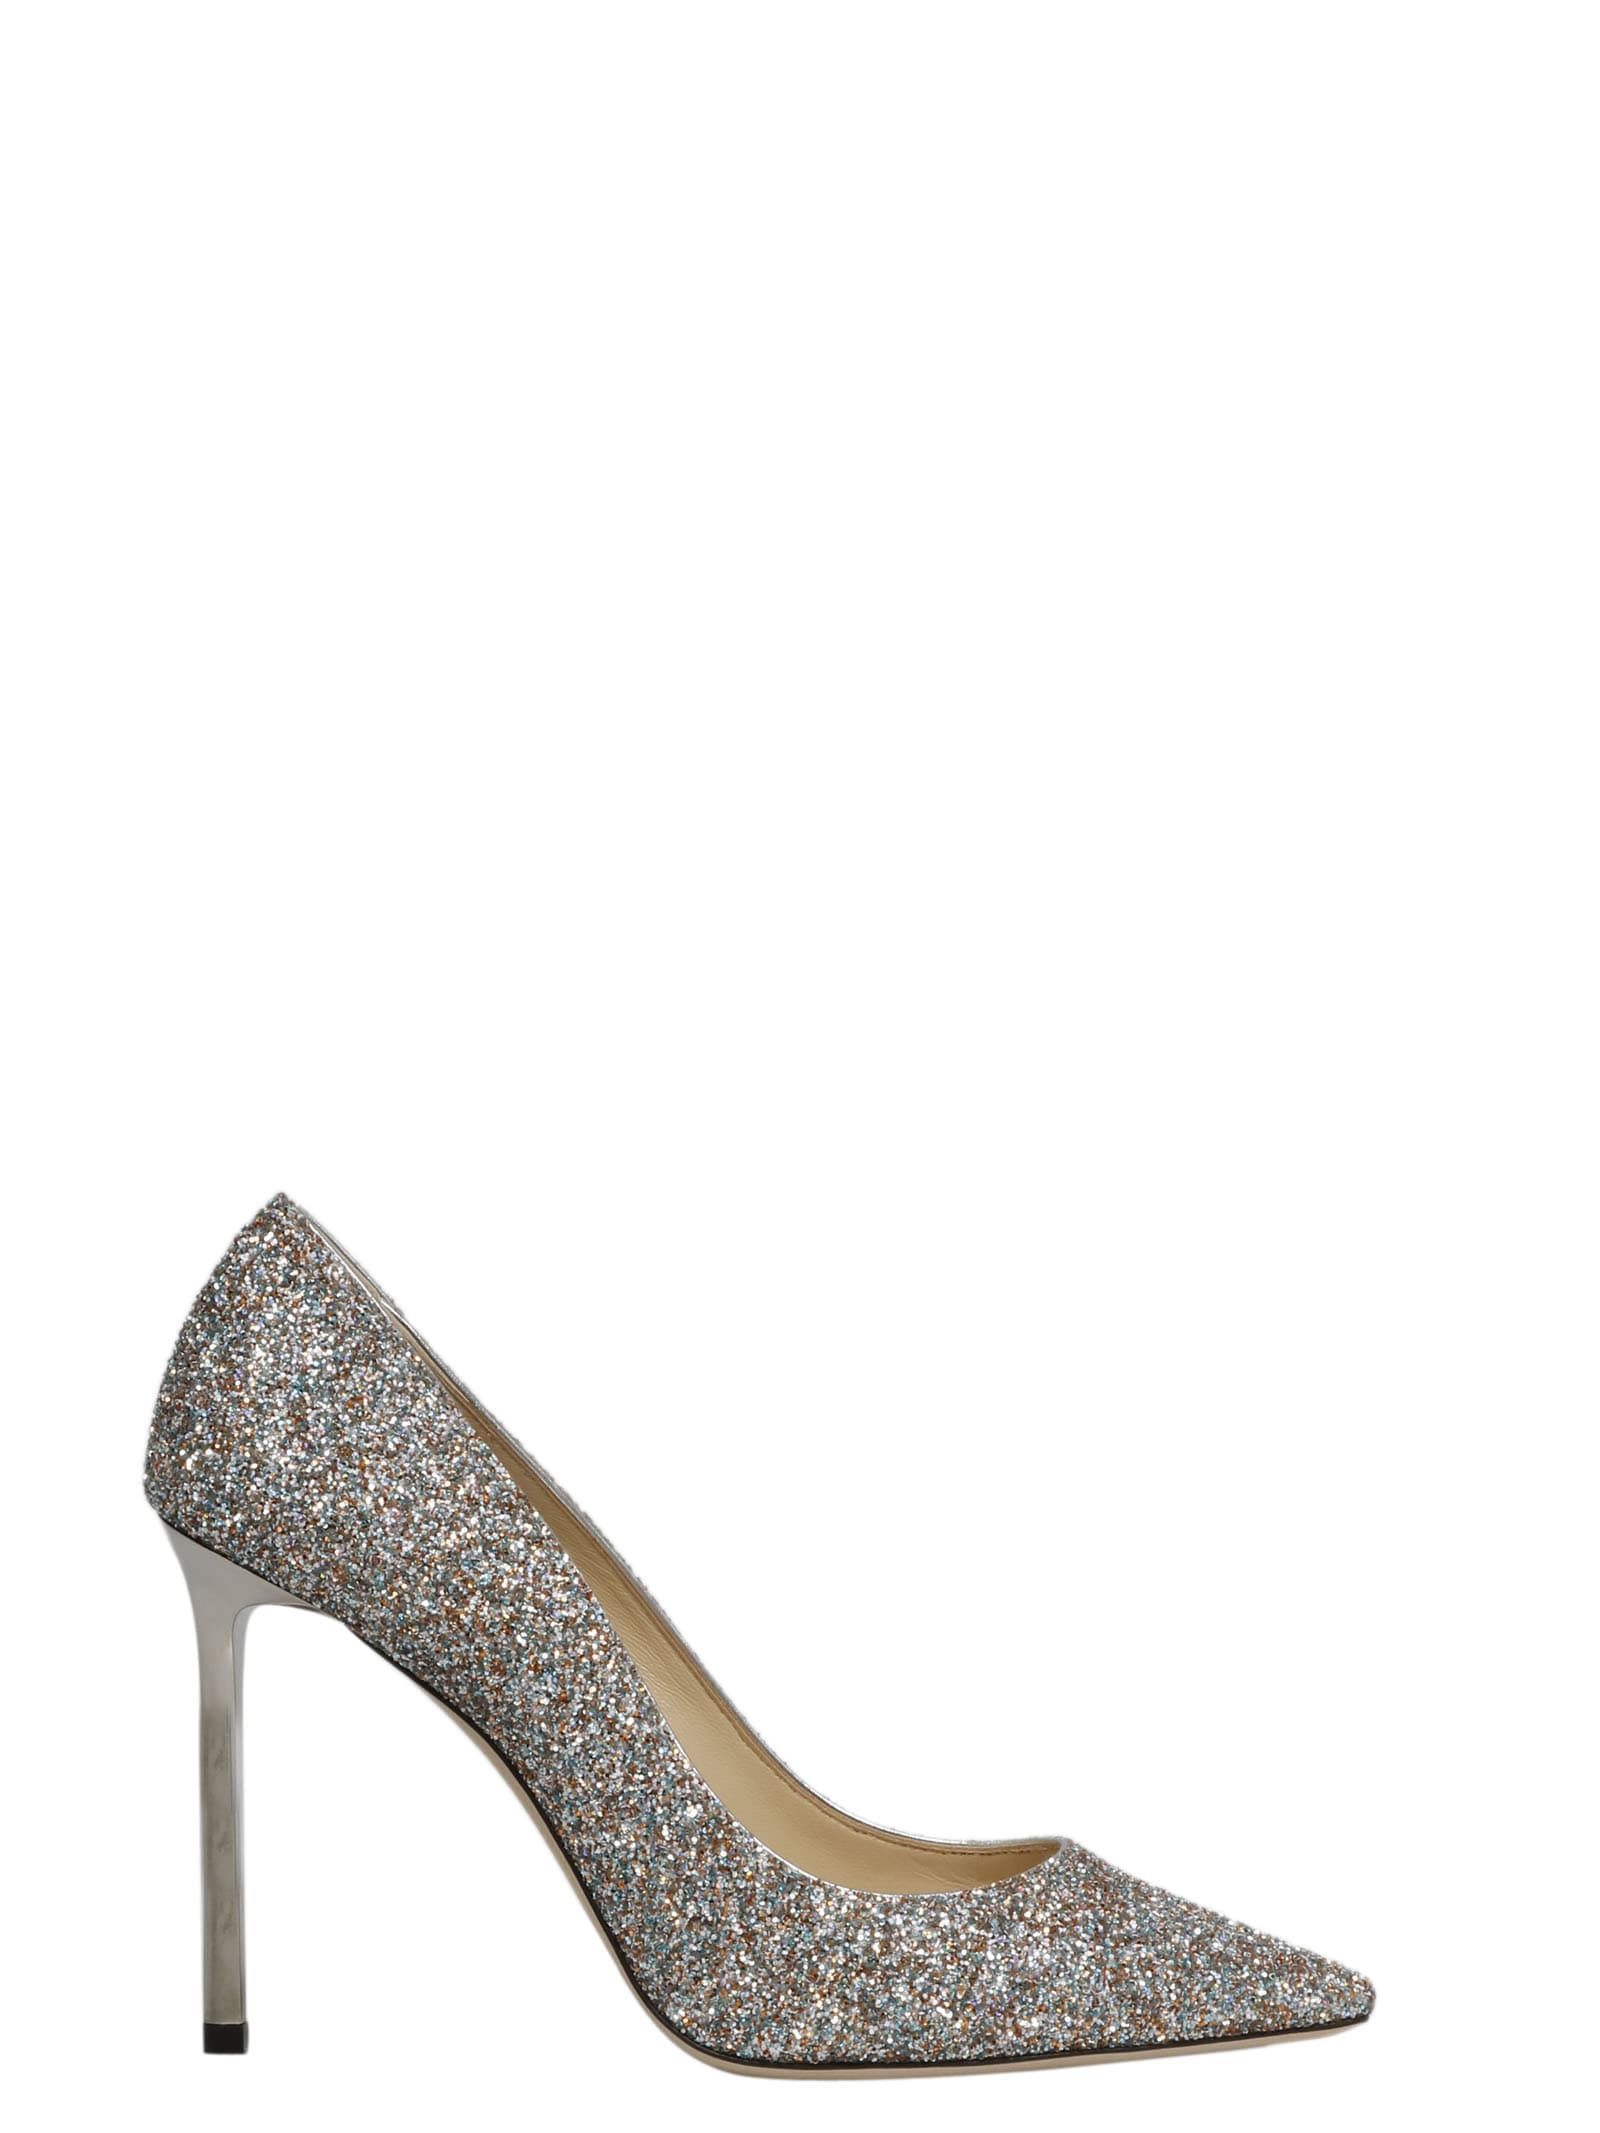 Buy Jimmy Choo Glitter Romy Pumps online, shop Jimmy Choo shoes with free shipping